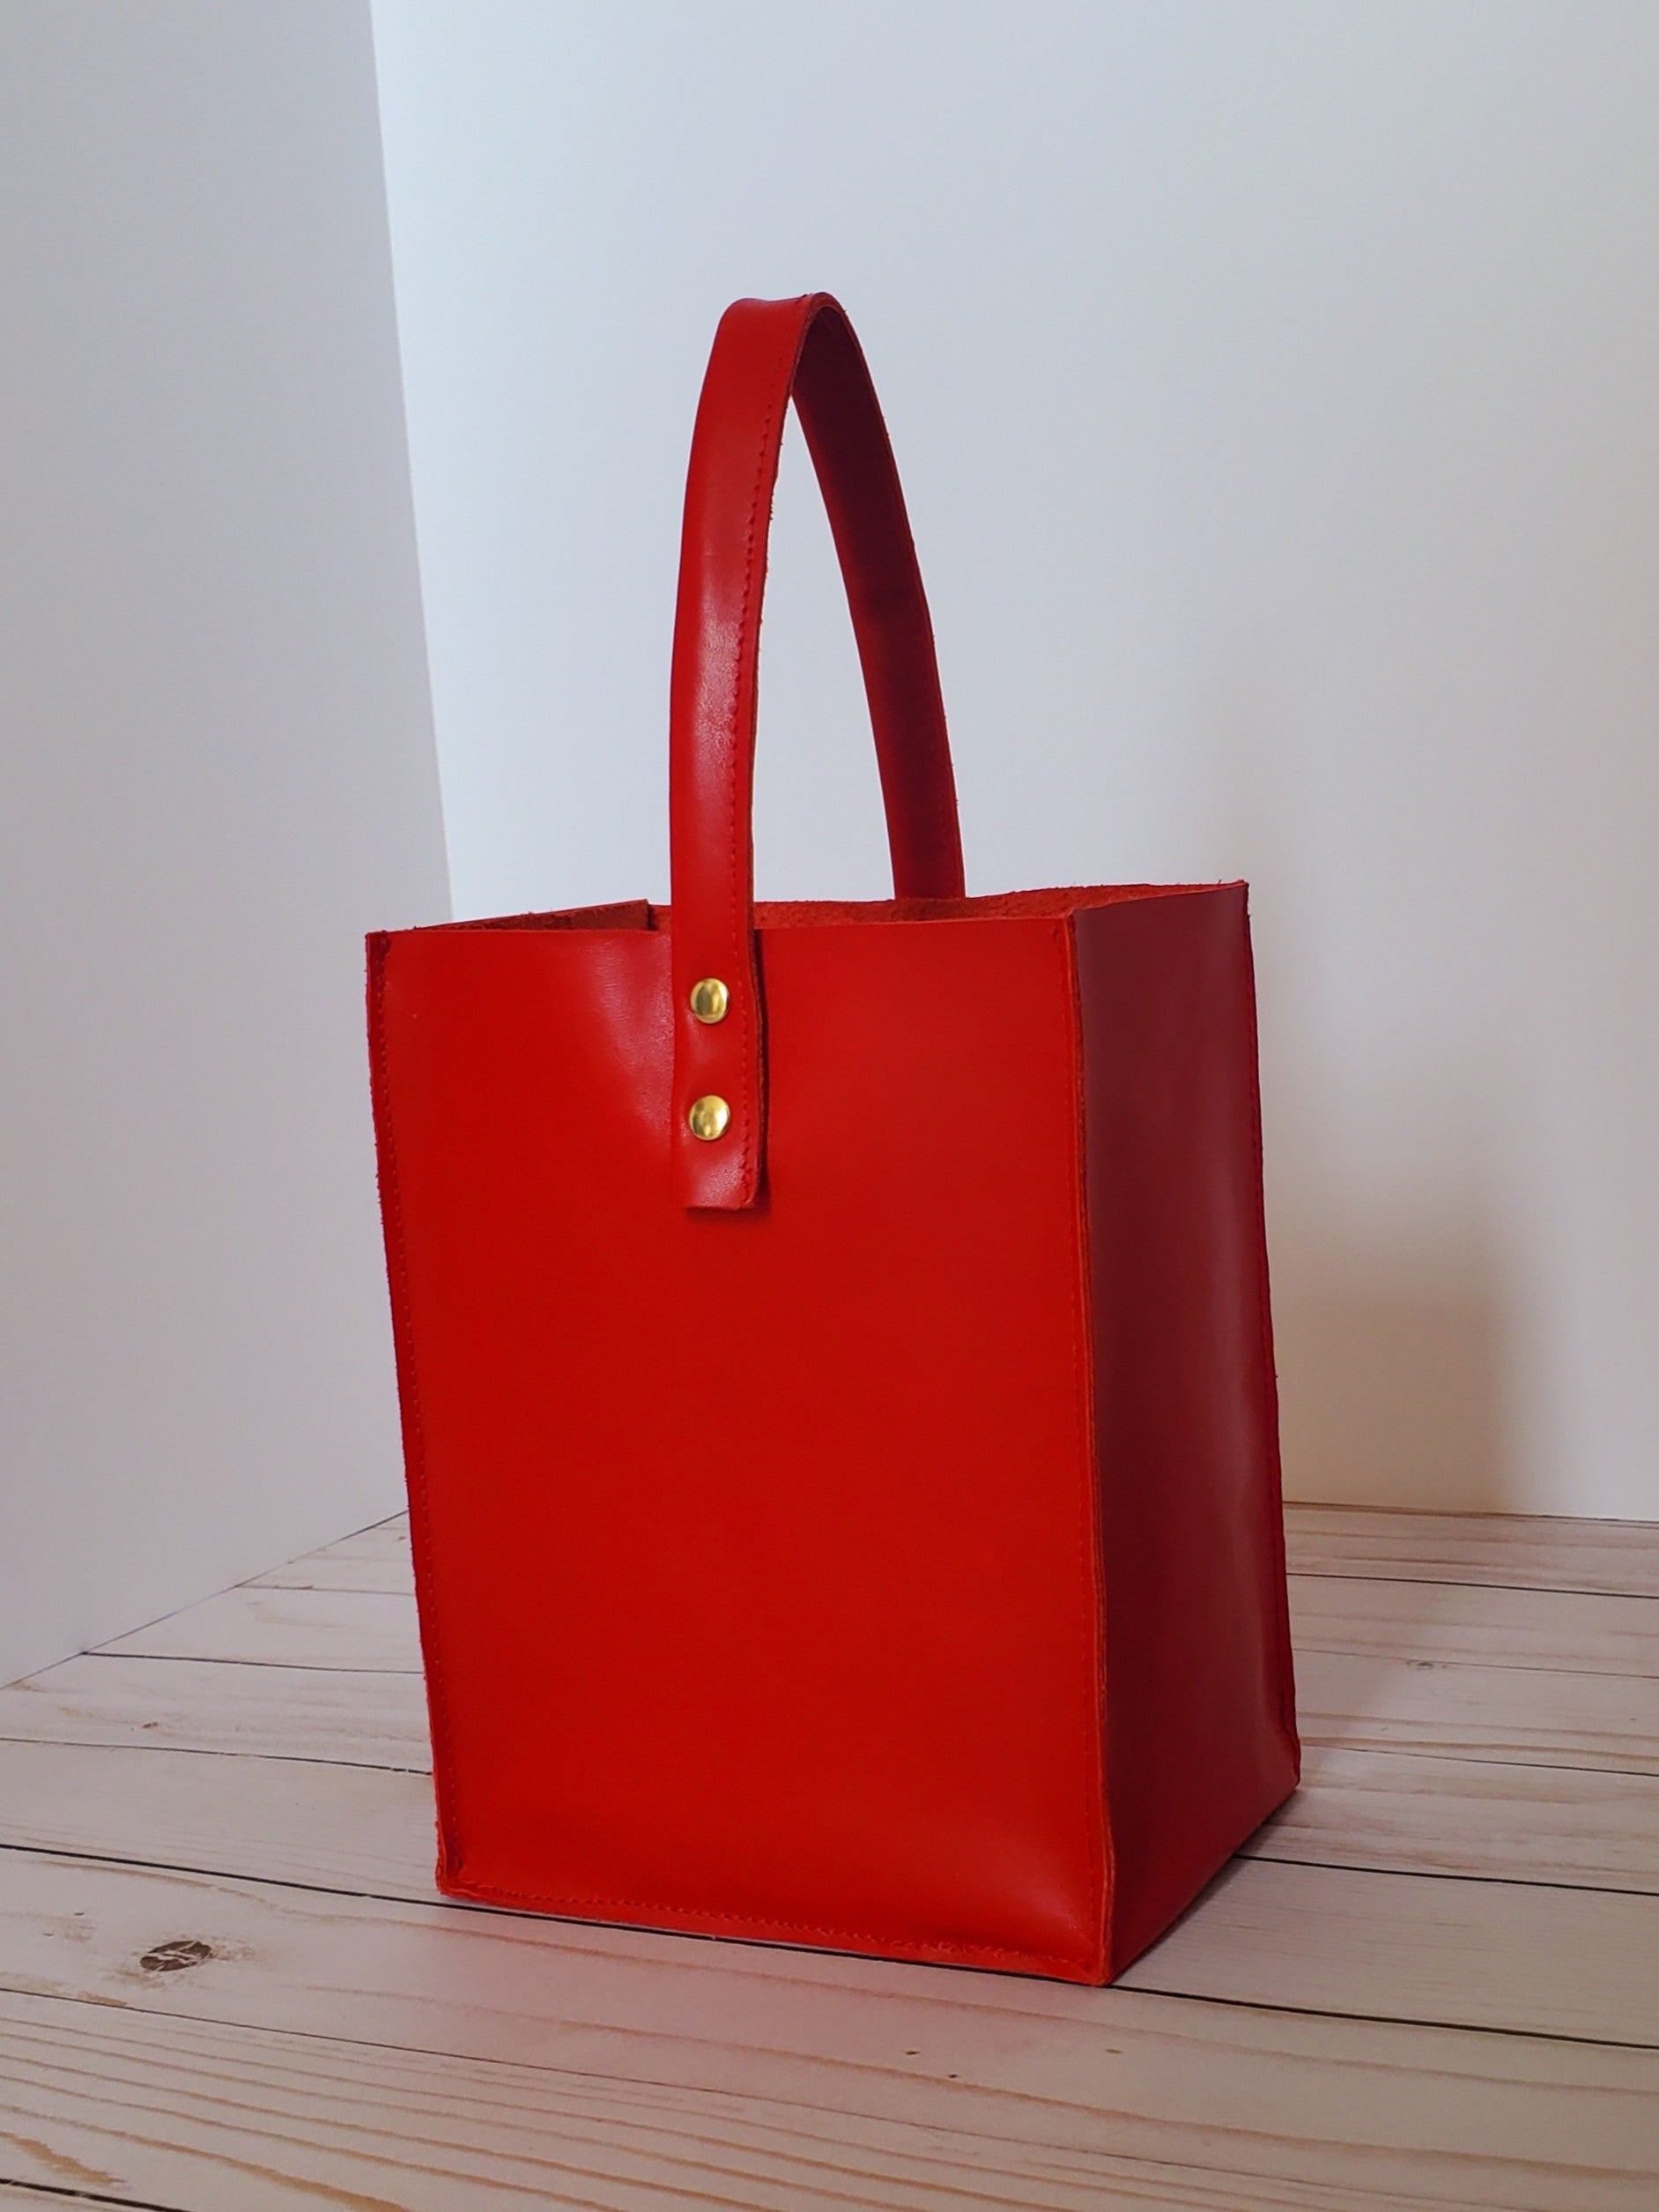 Red leather square bag with 1 handle. Made in Los Angeles,California